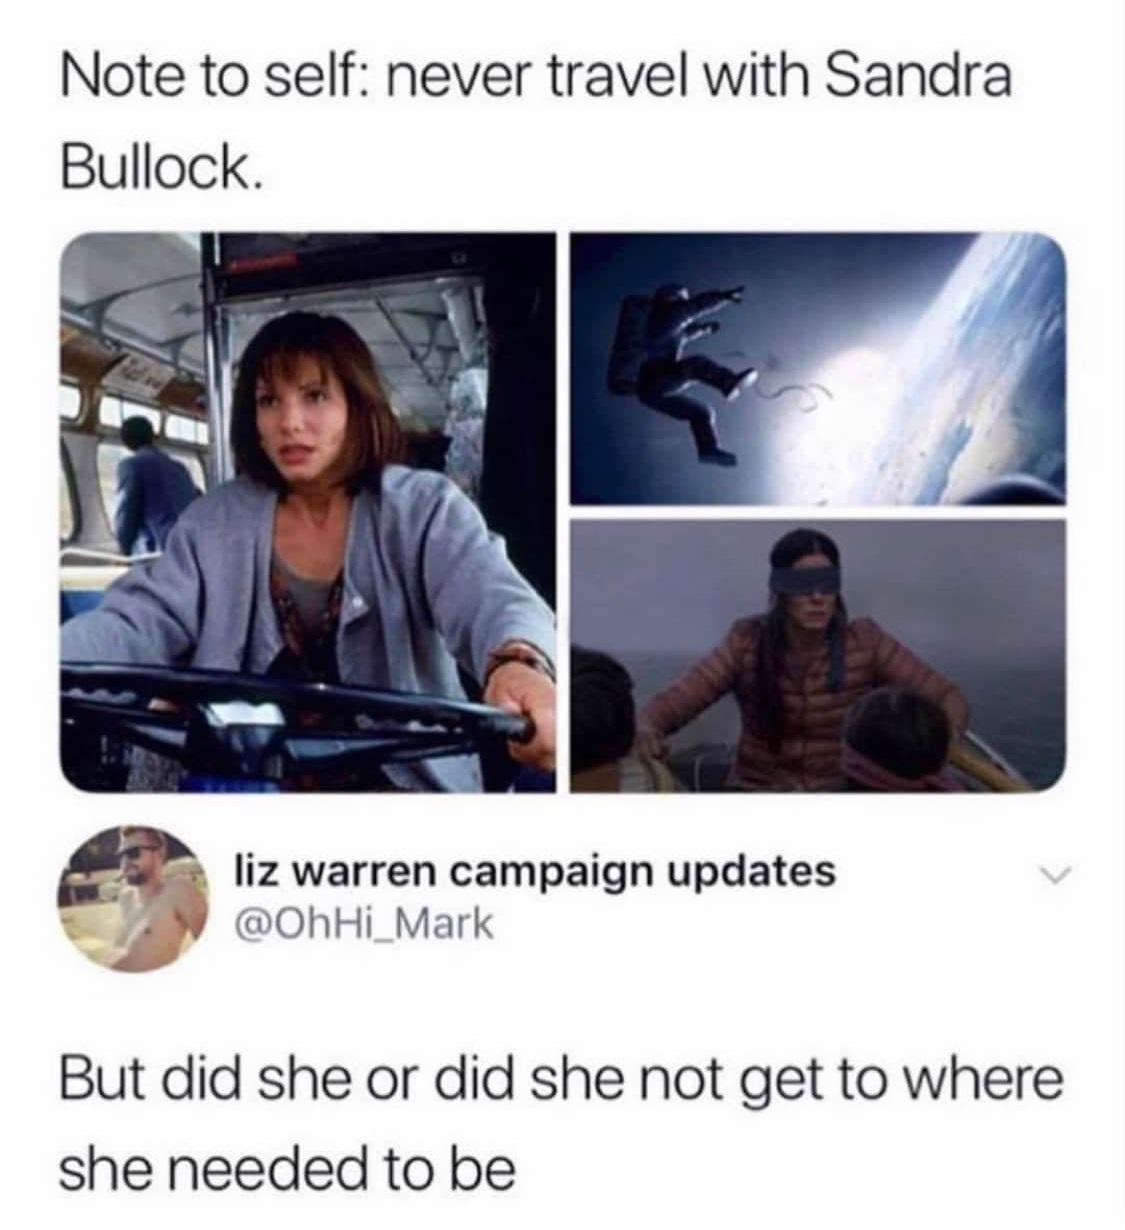 bird box memes funny - Note to self never travel with Sandra Bullock. liz warren campaign updates But did she or did she not get to where she needed to be